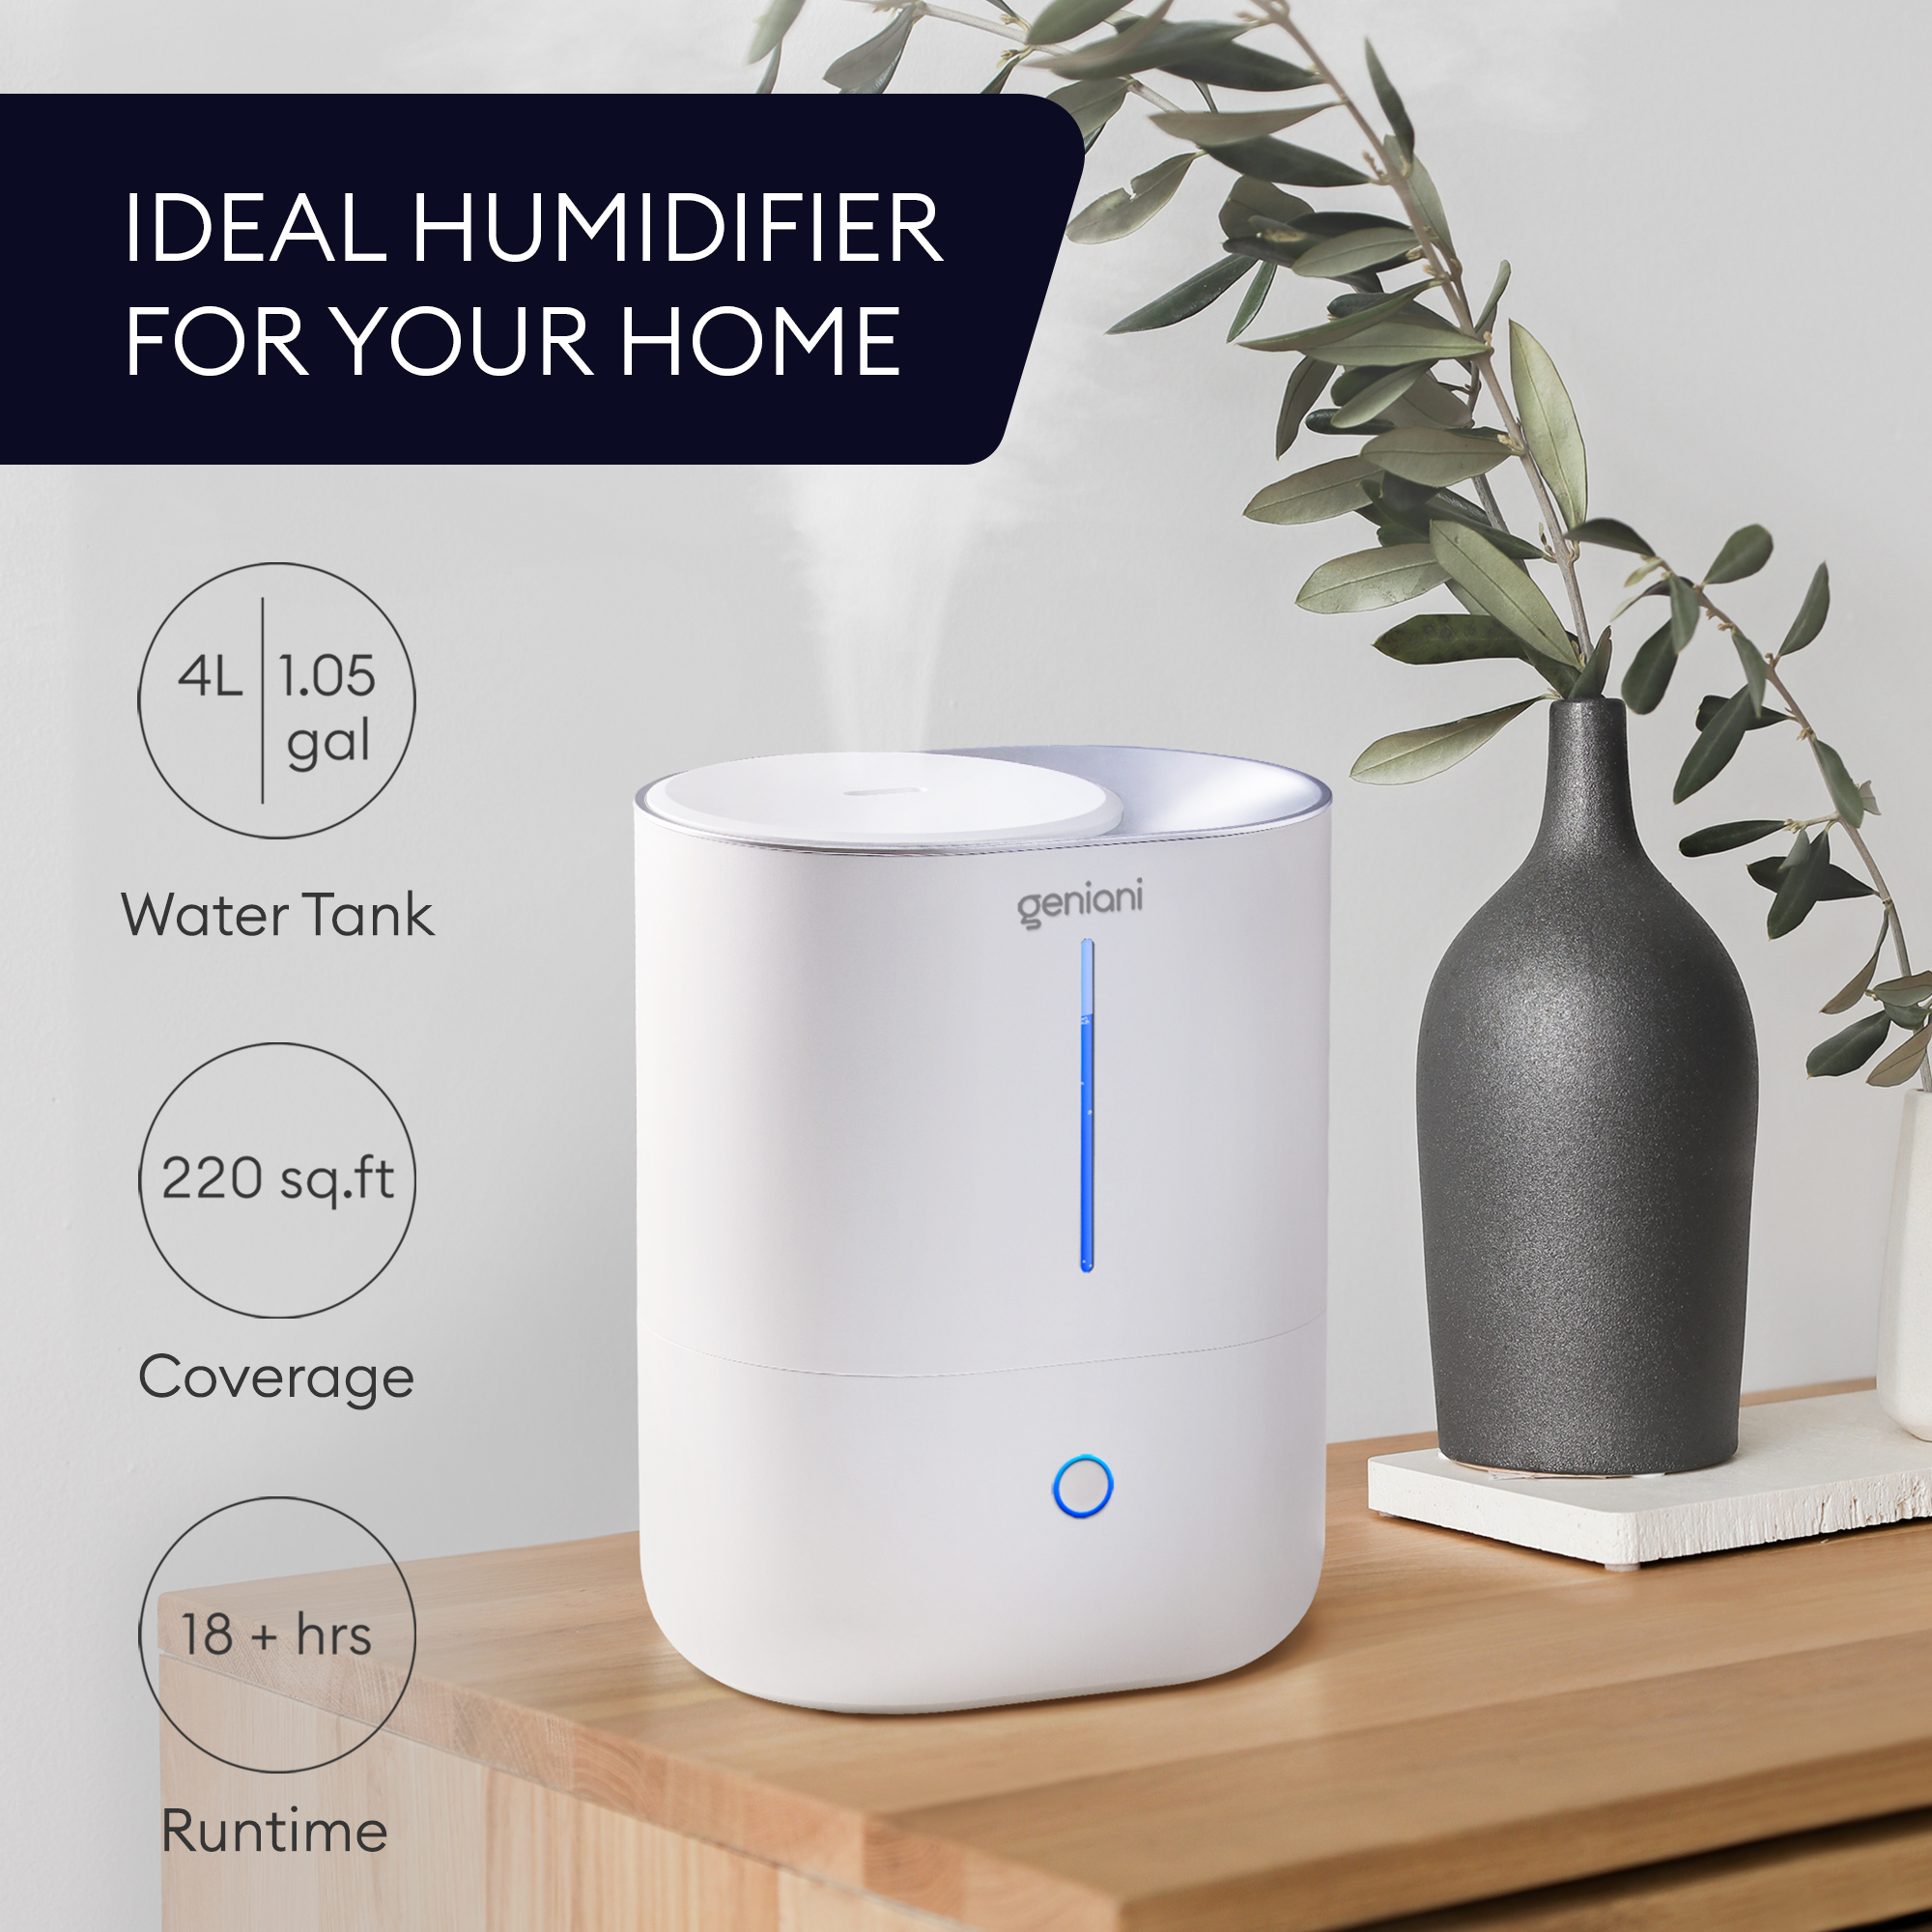 𝐋𝐚𝐫𝐠𝐞 𝐂𝐚𝐩𝐚𝐜𝐢𝐭𝐲 Top Fill Cool Mist Large Humidifier & Essential Oil Diffuser for Home - Smart Aroma Ultrasonic Air Humidifier for Bedroom, Baby, Kids, Plants - Auto Shut Off, 376 sqf - image 3 of 8